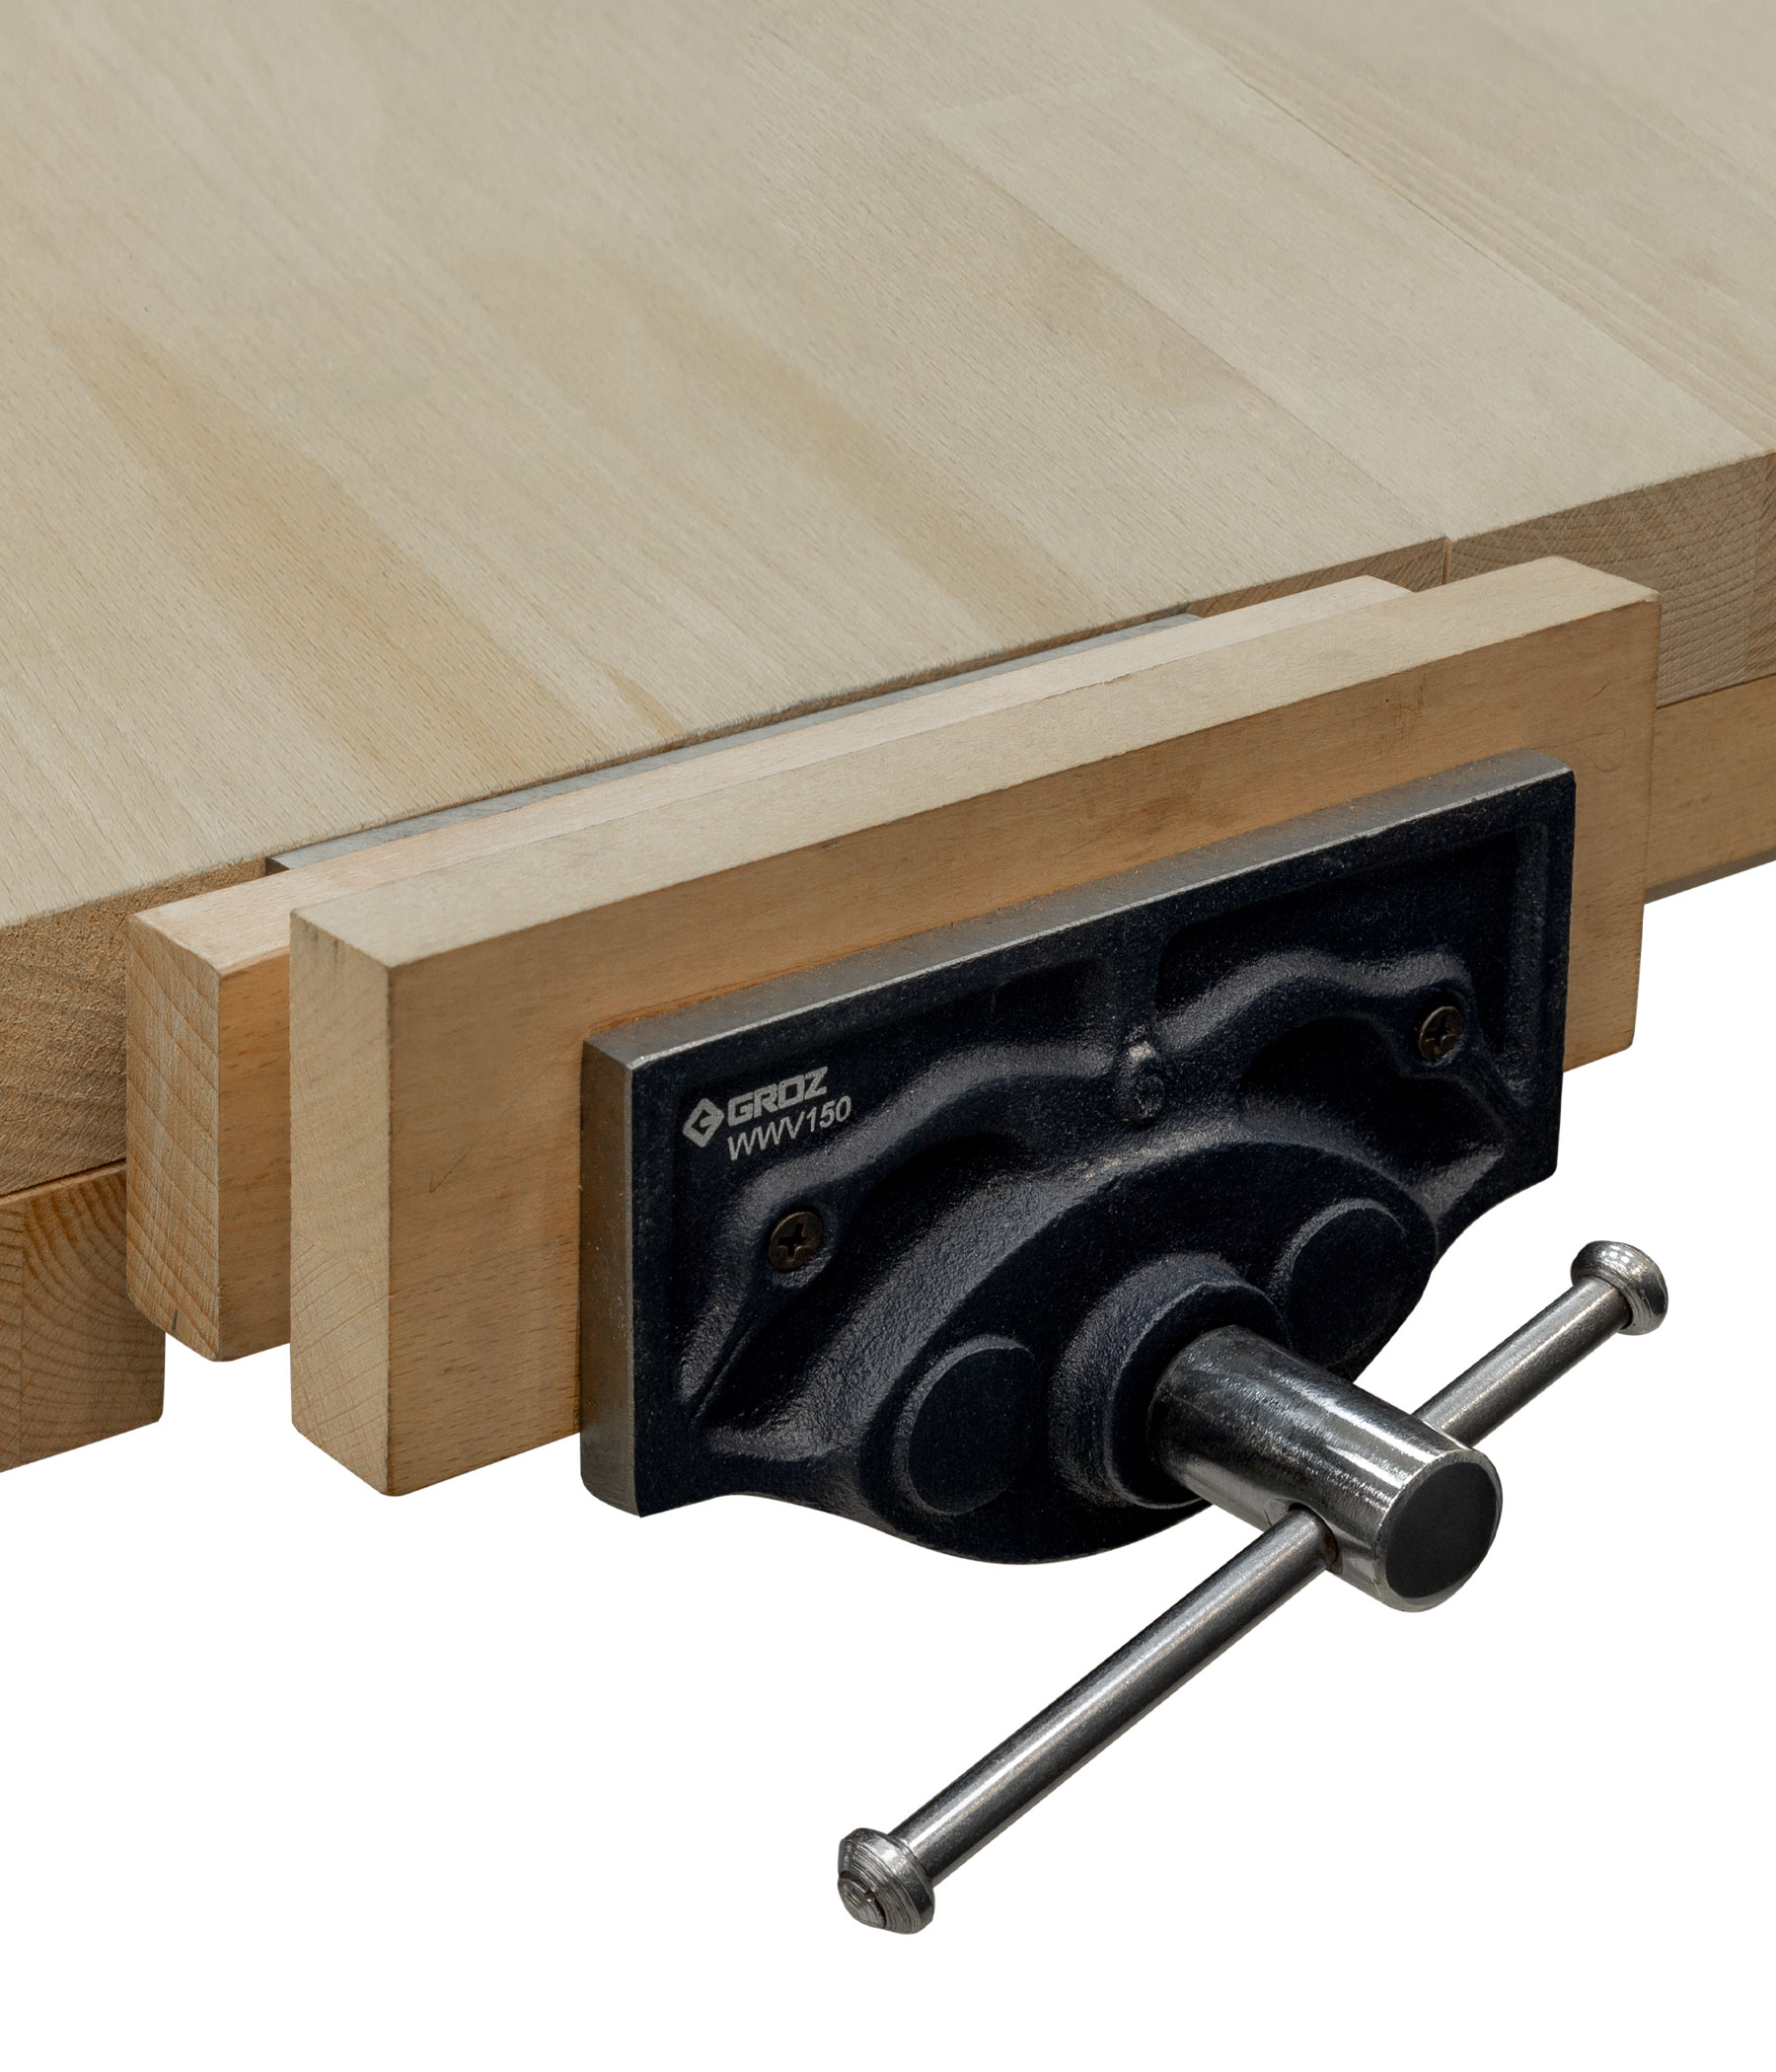 Joiner workbench VS 31 FV/SV with front and side vice pack